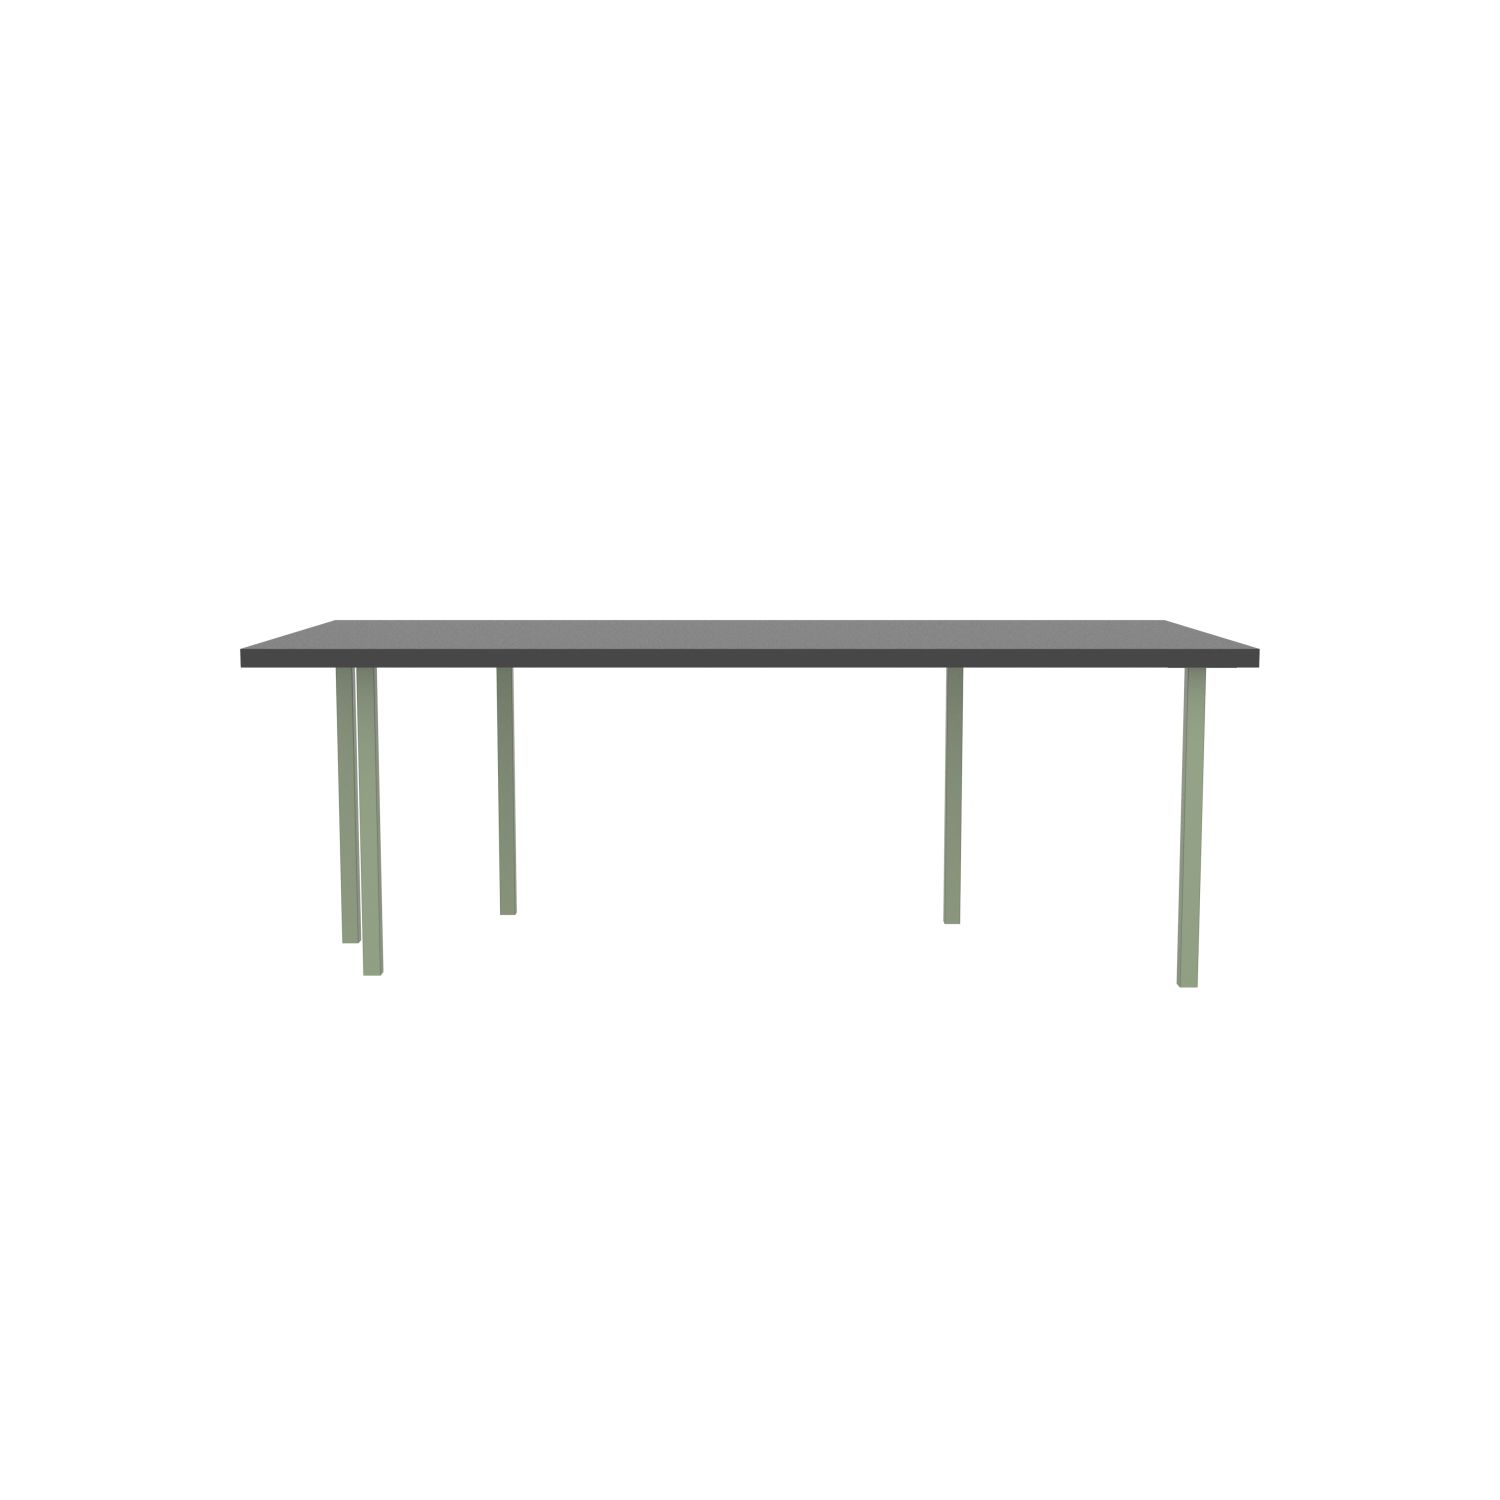 lensvelt bbrand table five fixed heigt 103x218 hpl black 50 mm price level 1 green ral6021